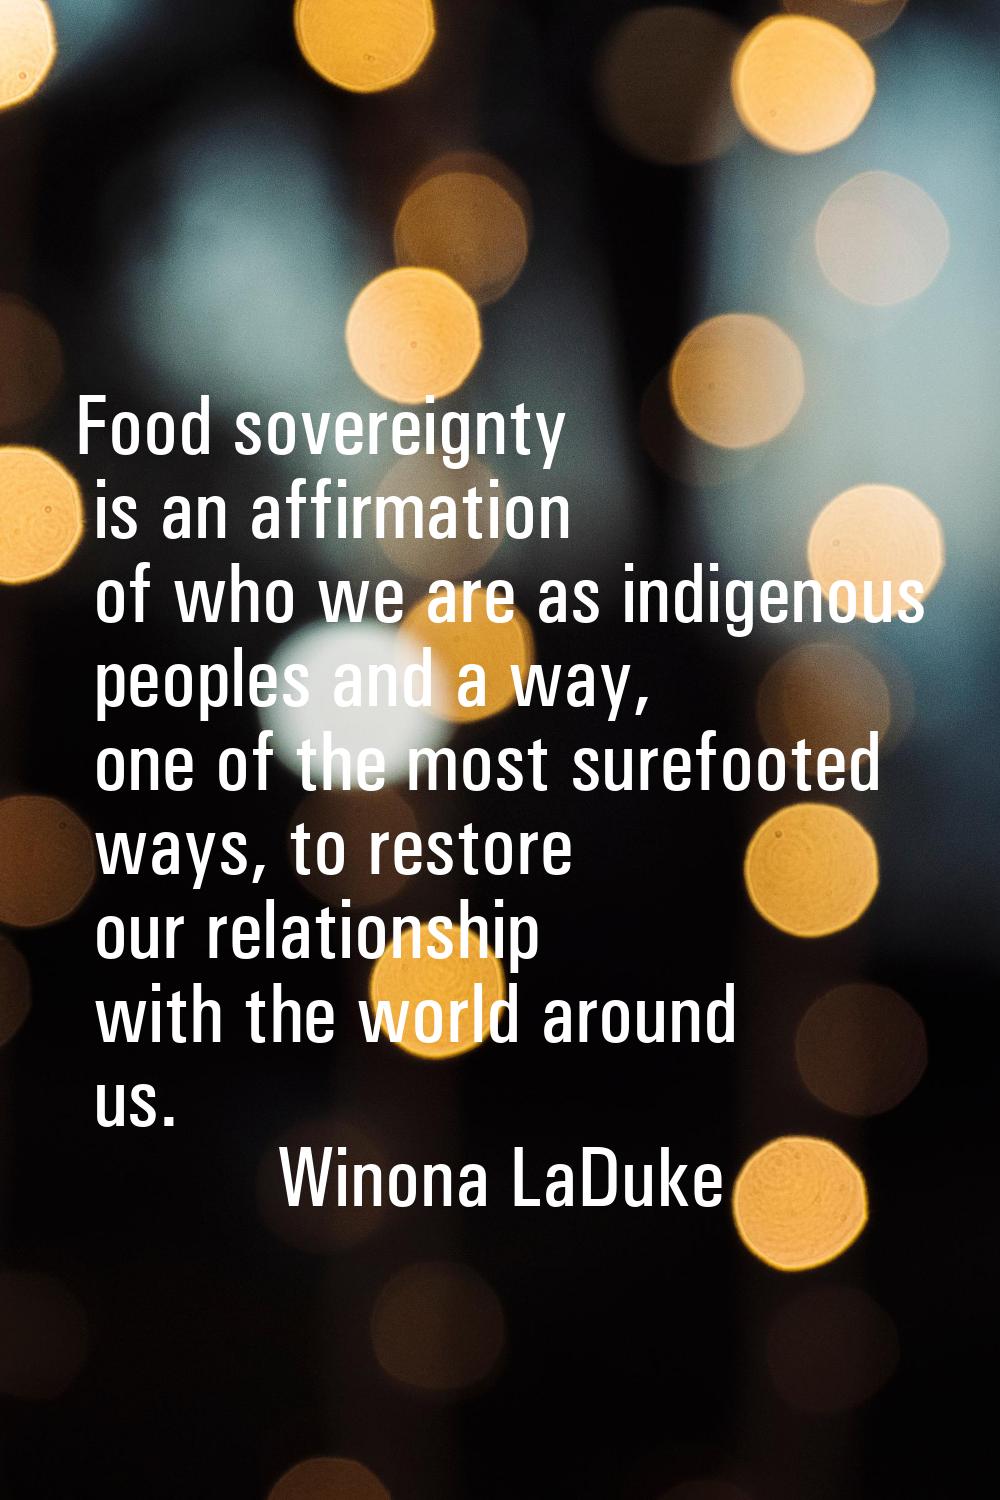 Food sovereignty is an affirmation of who we are as indigenous peoples and a way, one of the most s